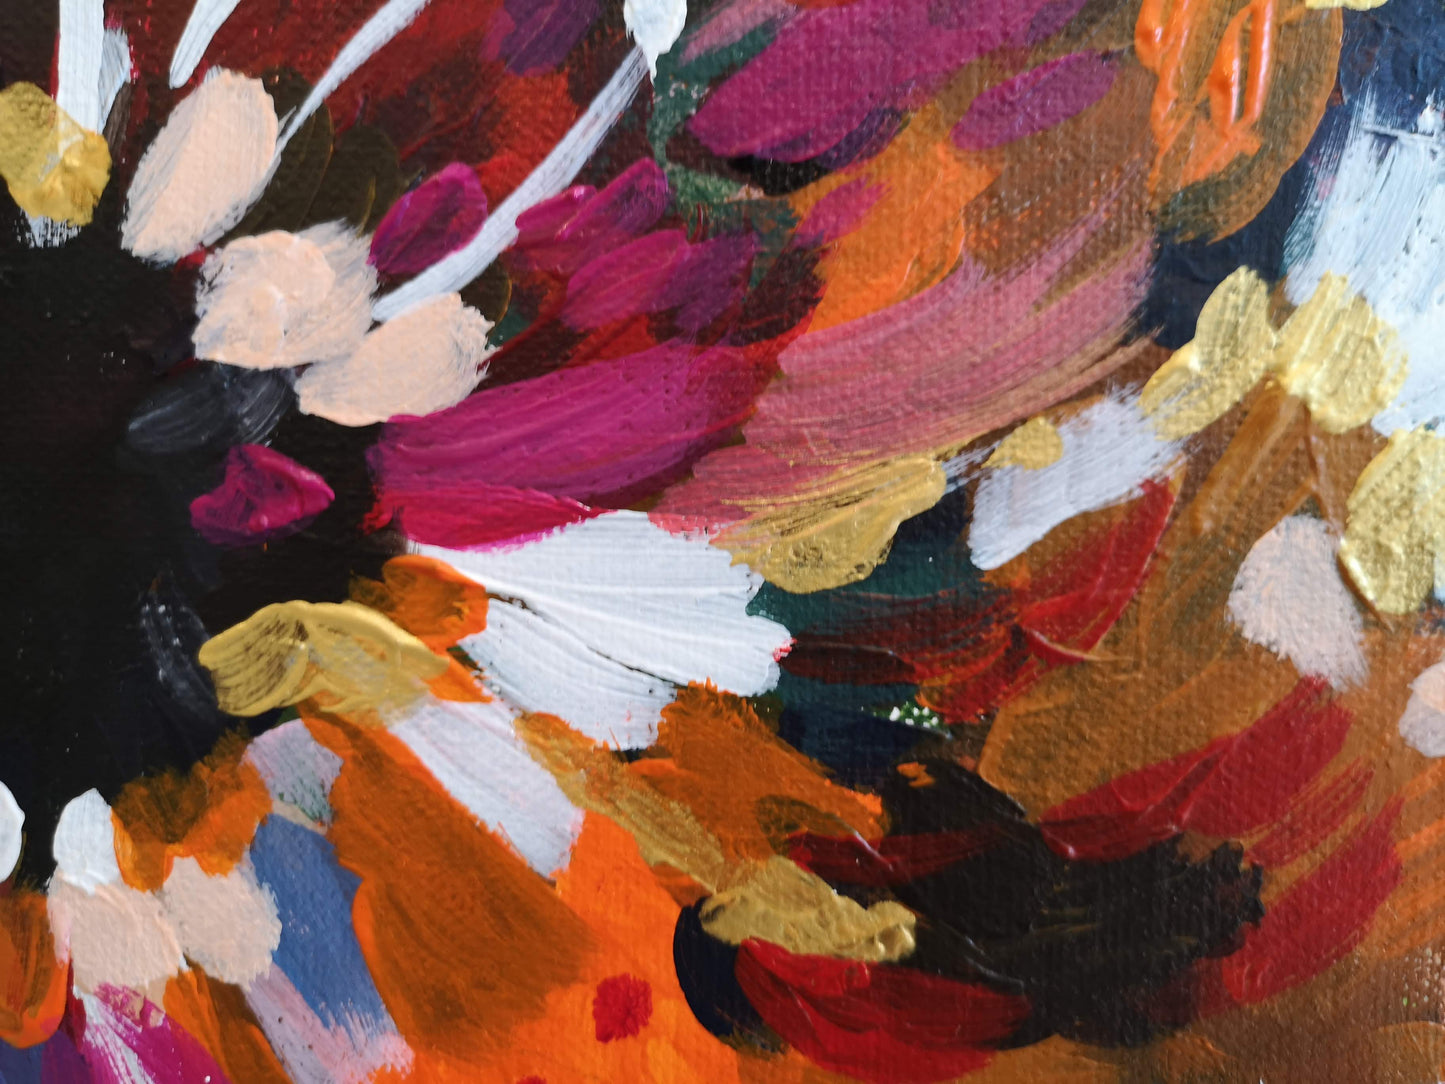 Close up of original abstract painting 'Tropical Garden' by Judy Century. Expressive magenta, orange, brown, gold, red, white and black brushstrokes.